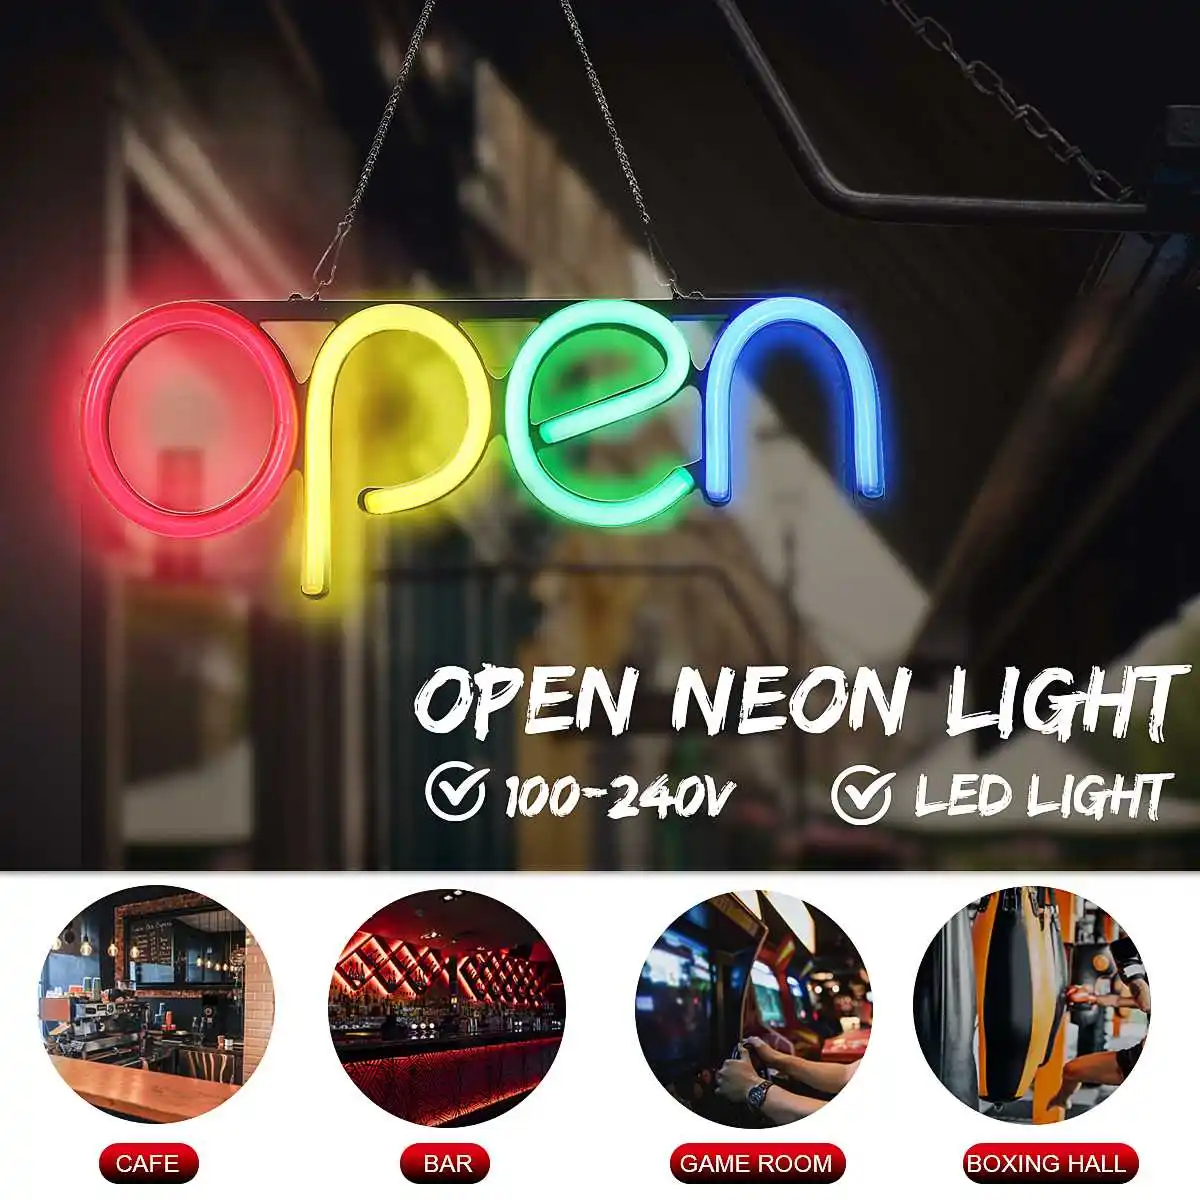 Business OPEN LED Neon Sign Tube Light Artwork Bar Pub Club Hanging Wall Advertising Lamp Home Decor Store Door Window Display